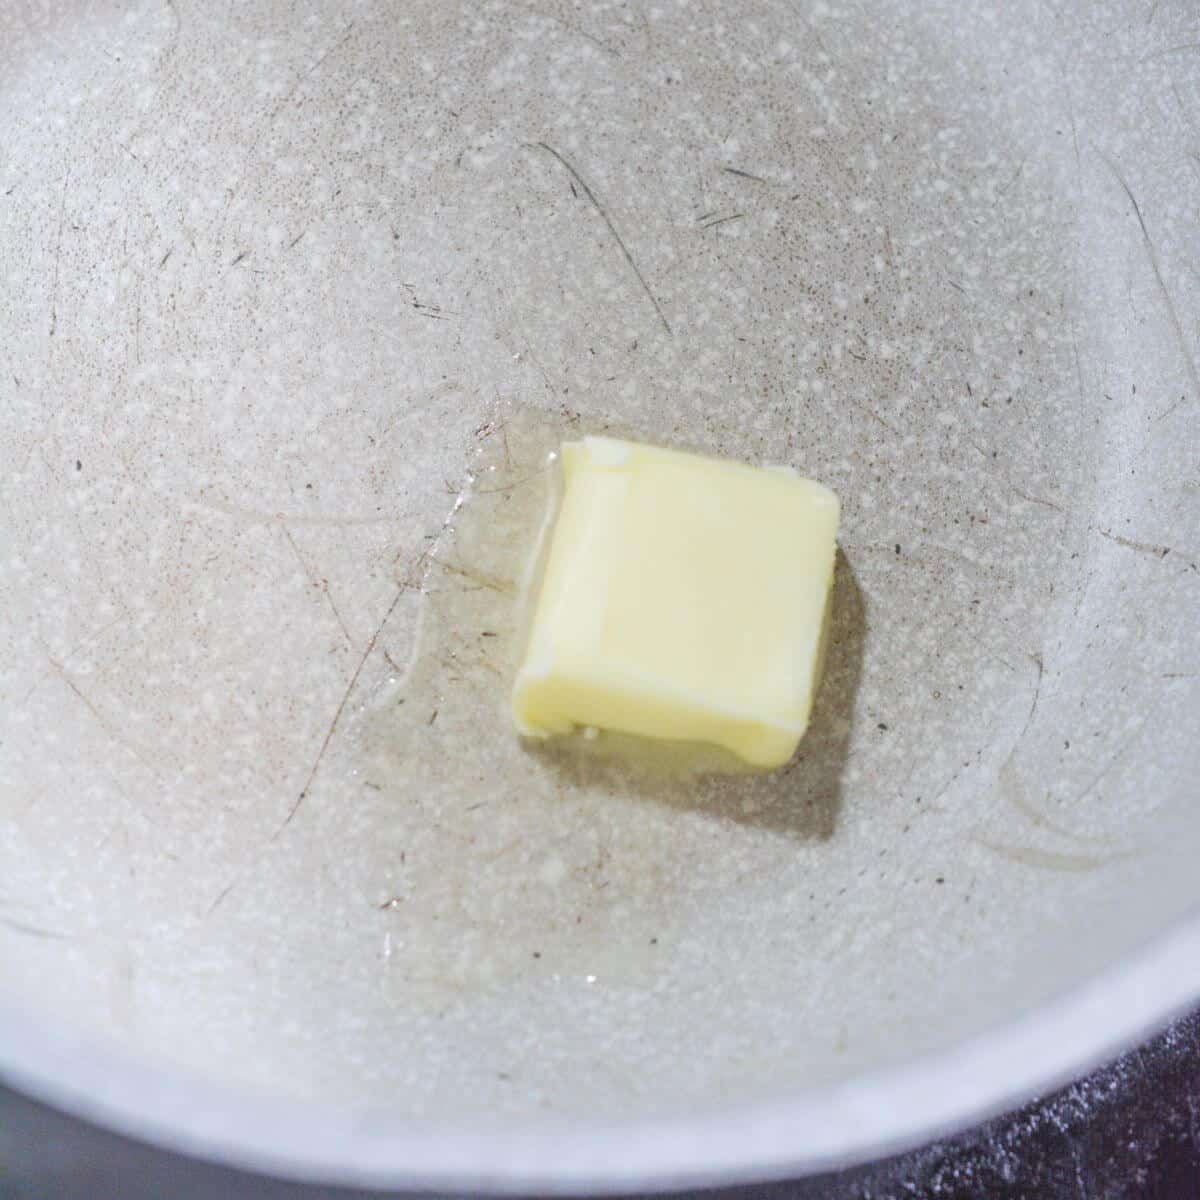 melting butter in the soup pot.